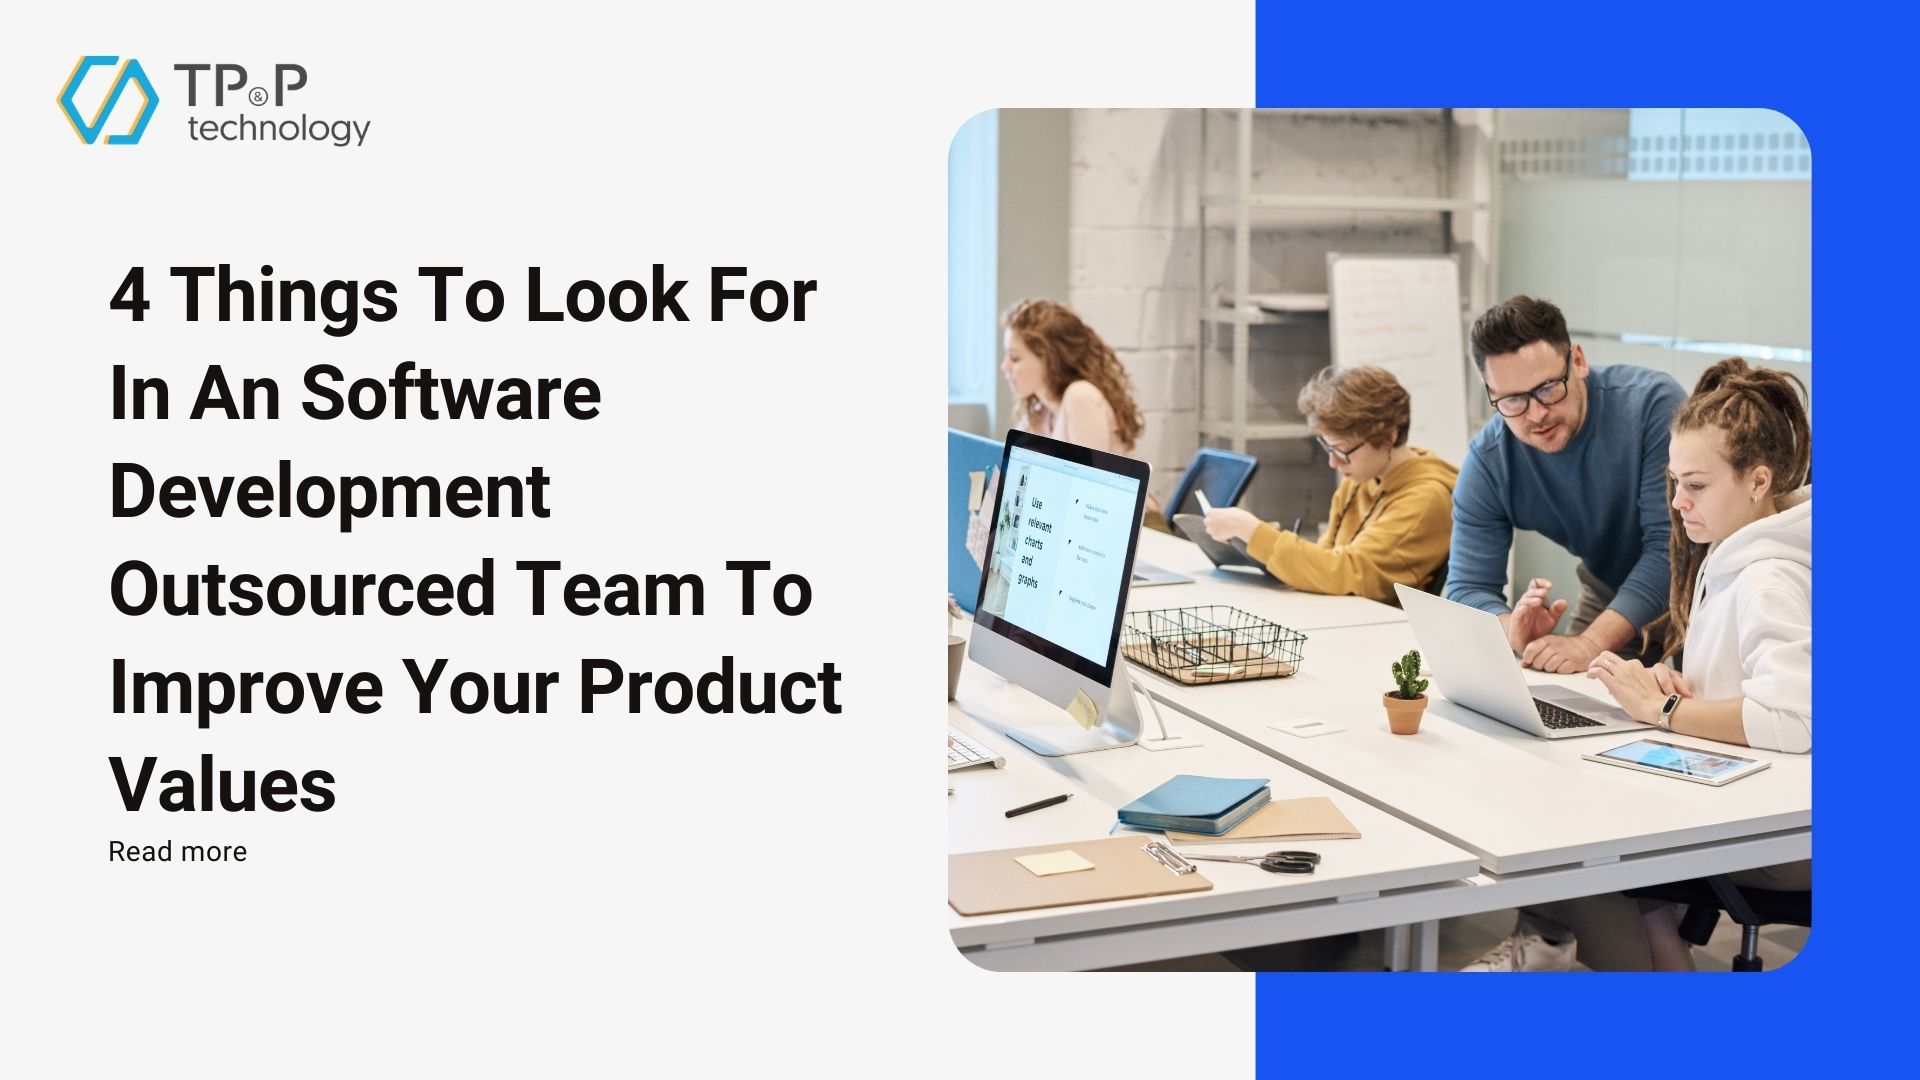 4 Things To Look For In An Software Development Outsourced Team To Improve Your Product Values